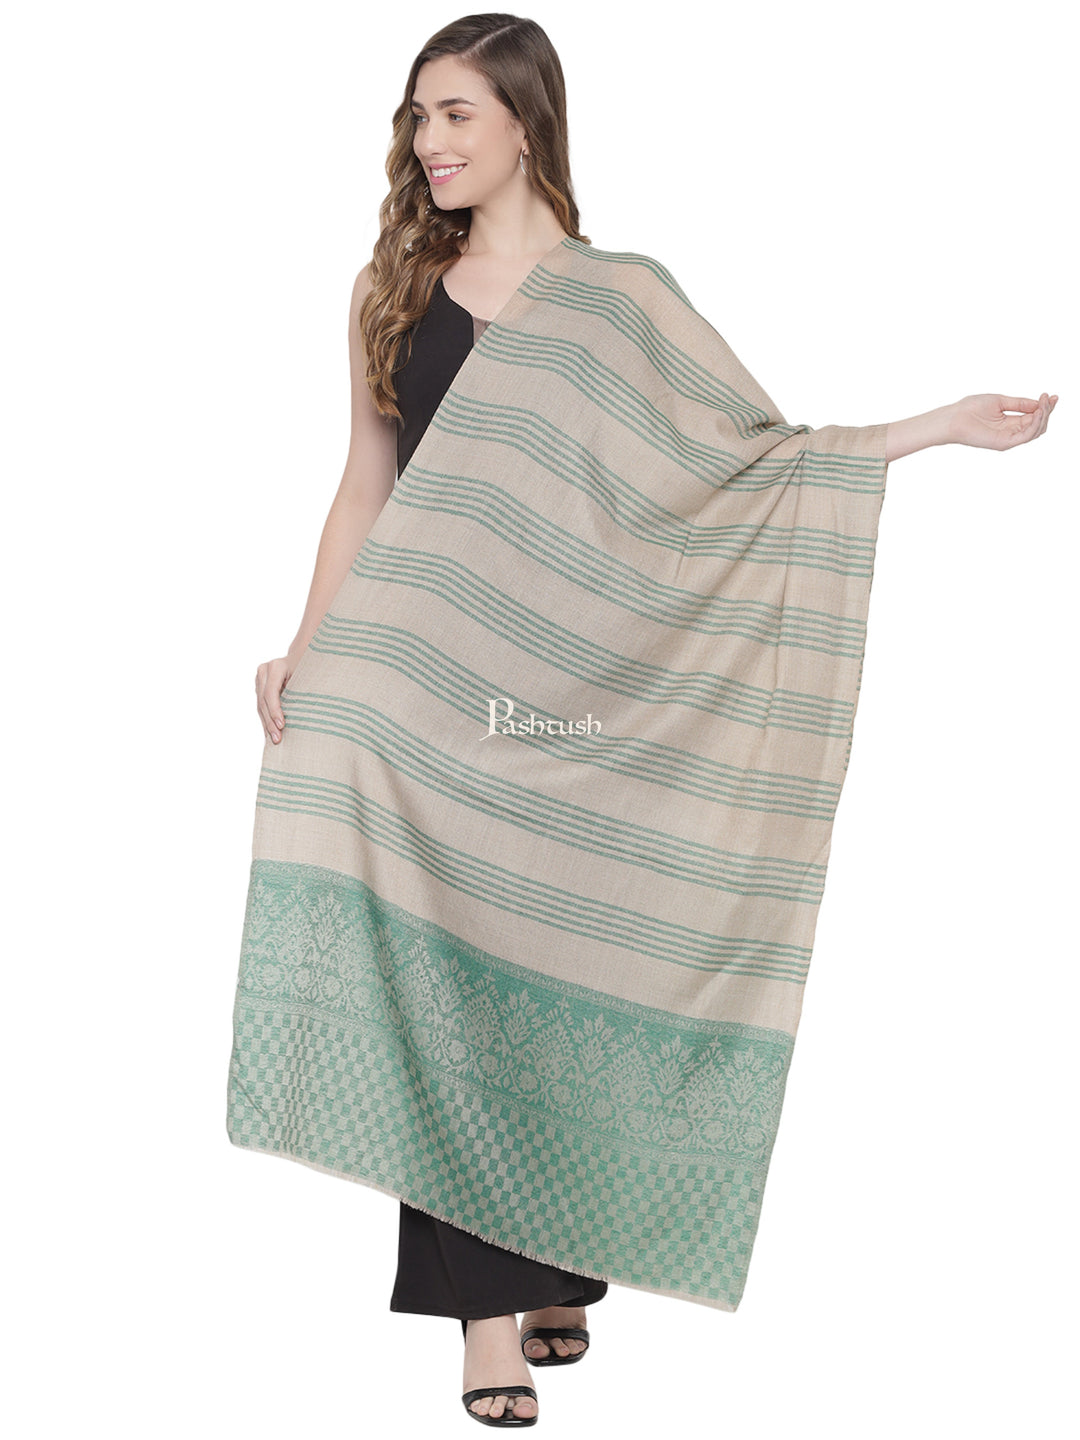 Pashtush Womens, Fine Wool Stole, Striped Weave, Beige and Green